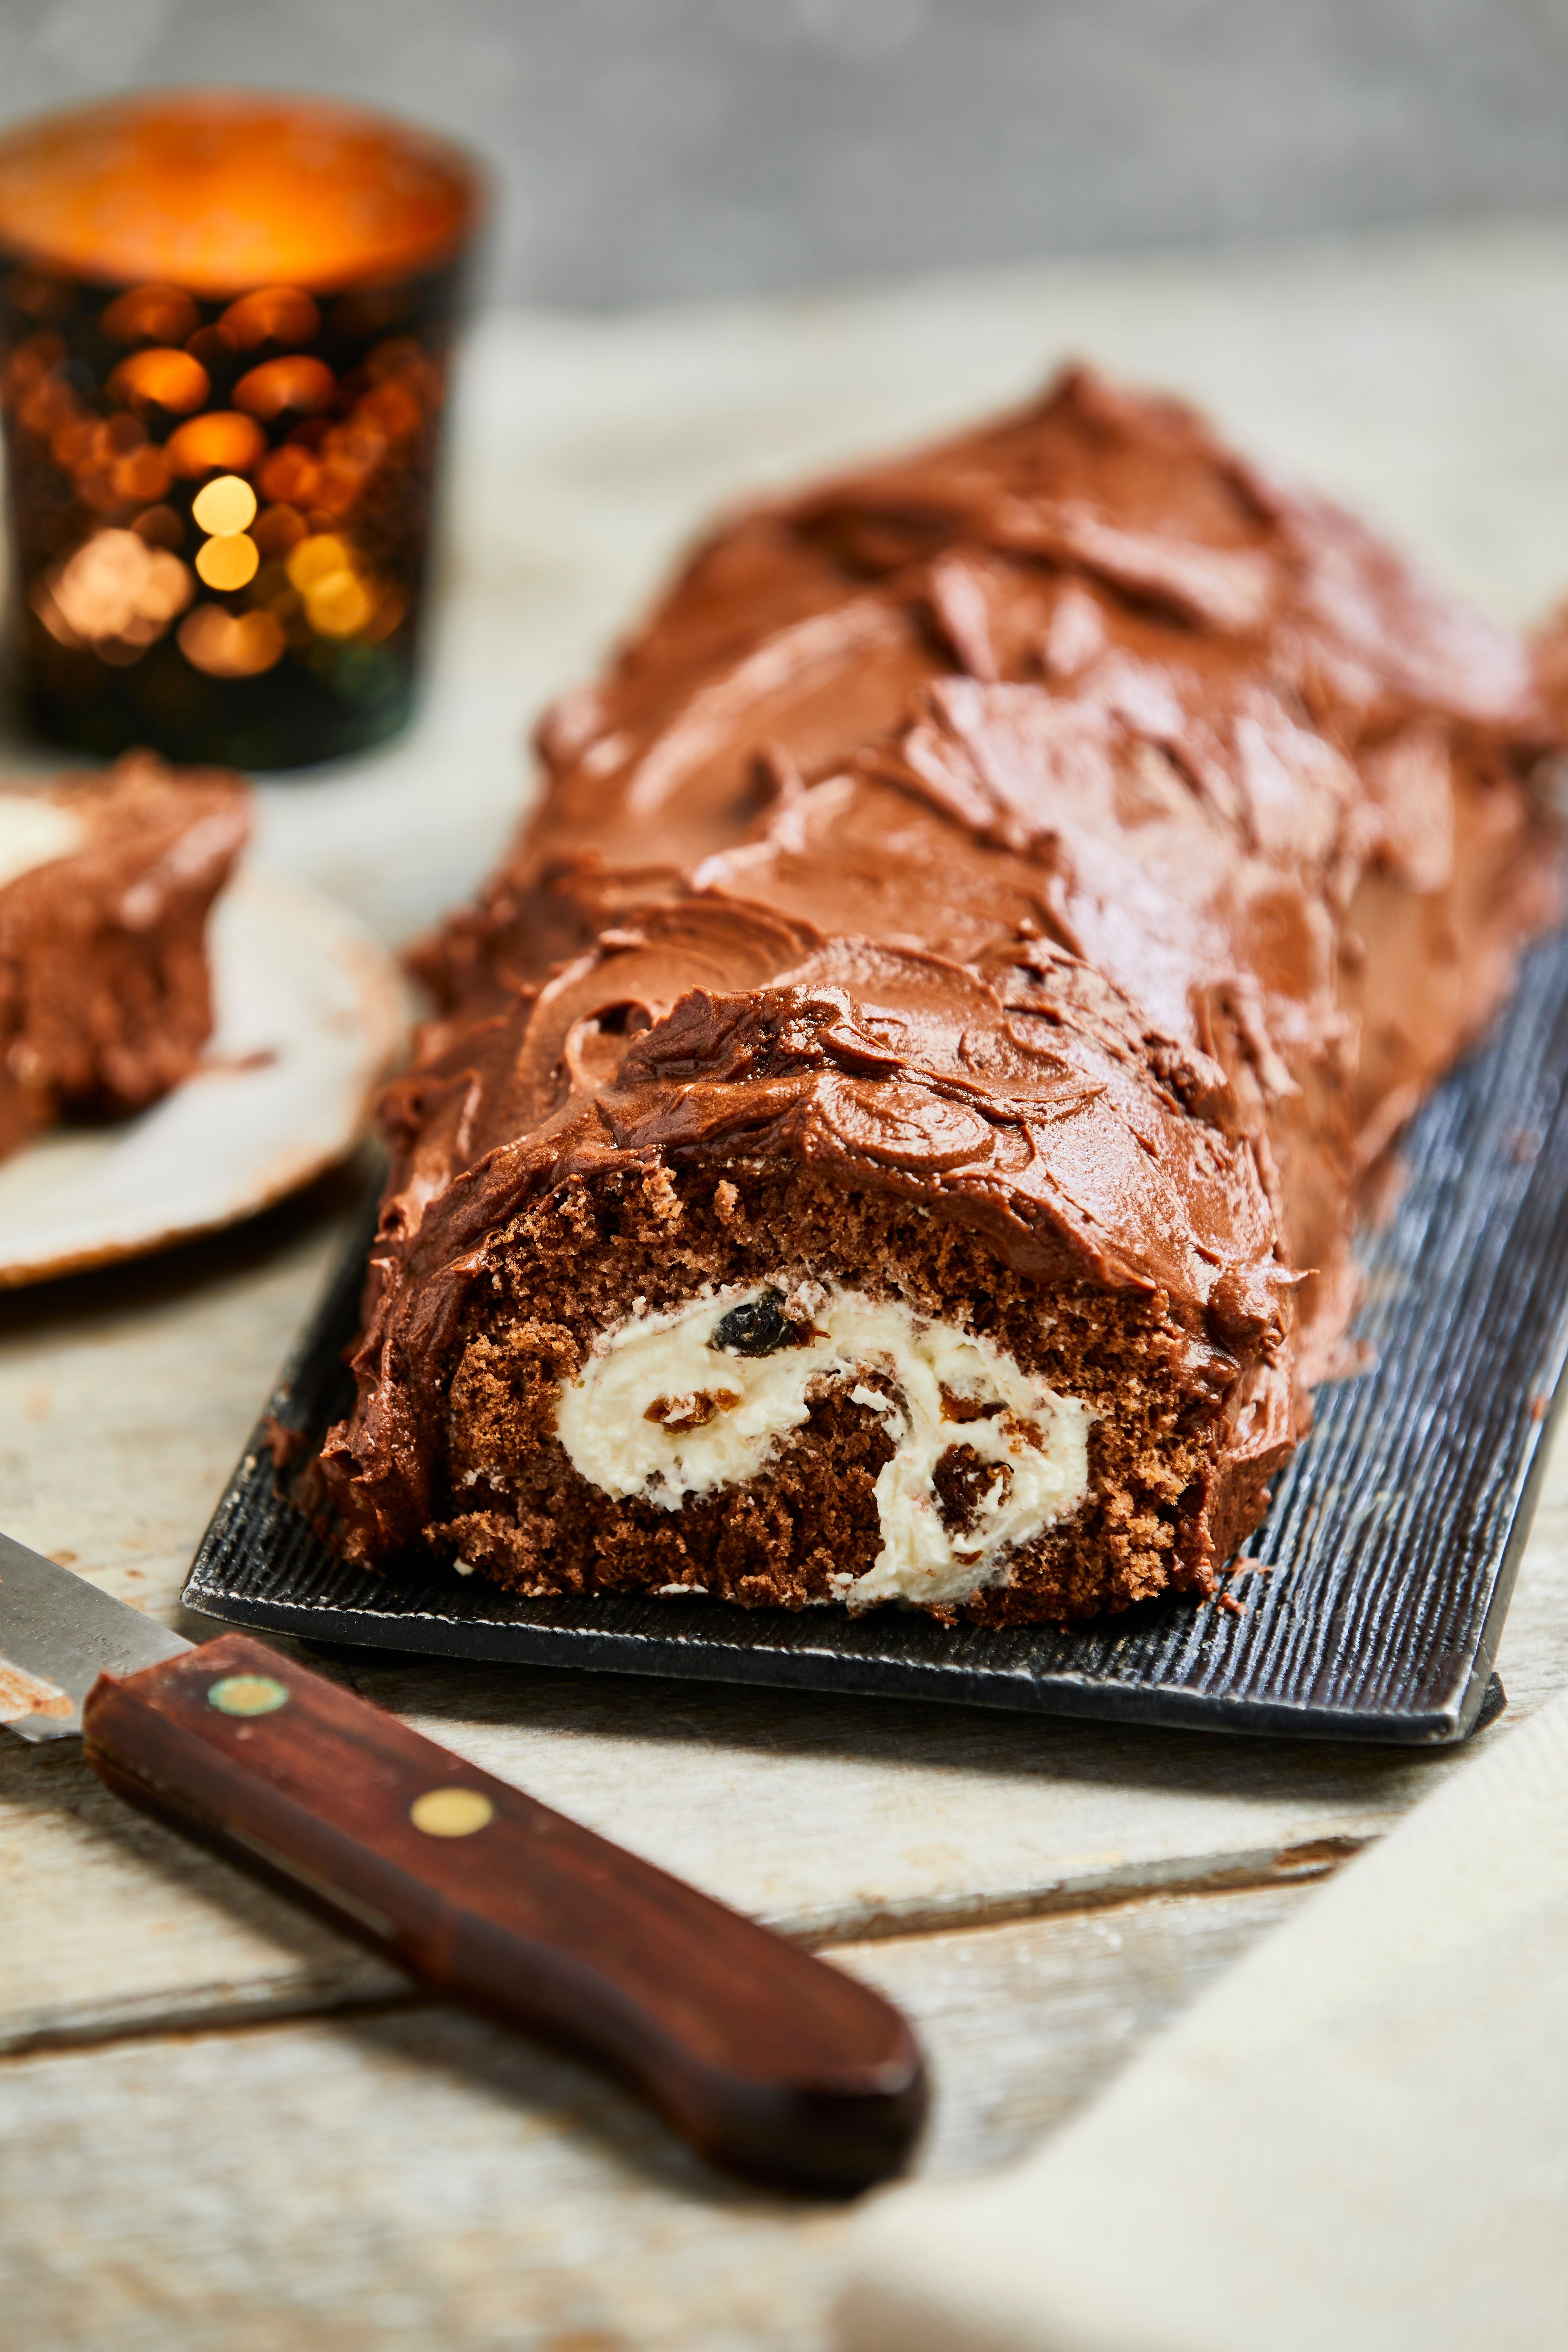 Make those chocolate oranges – and Christmas – go a little further with a leftover yule log